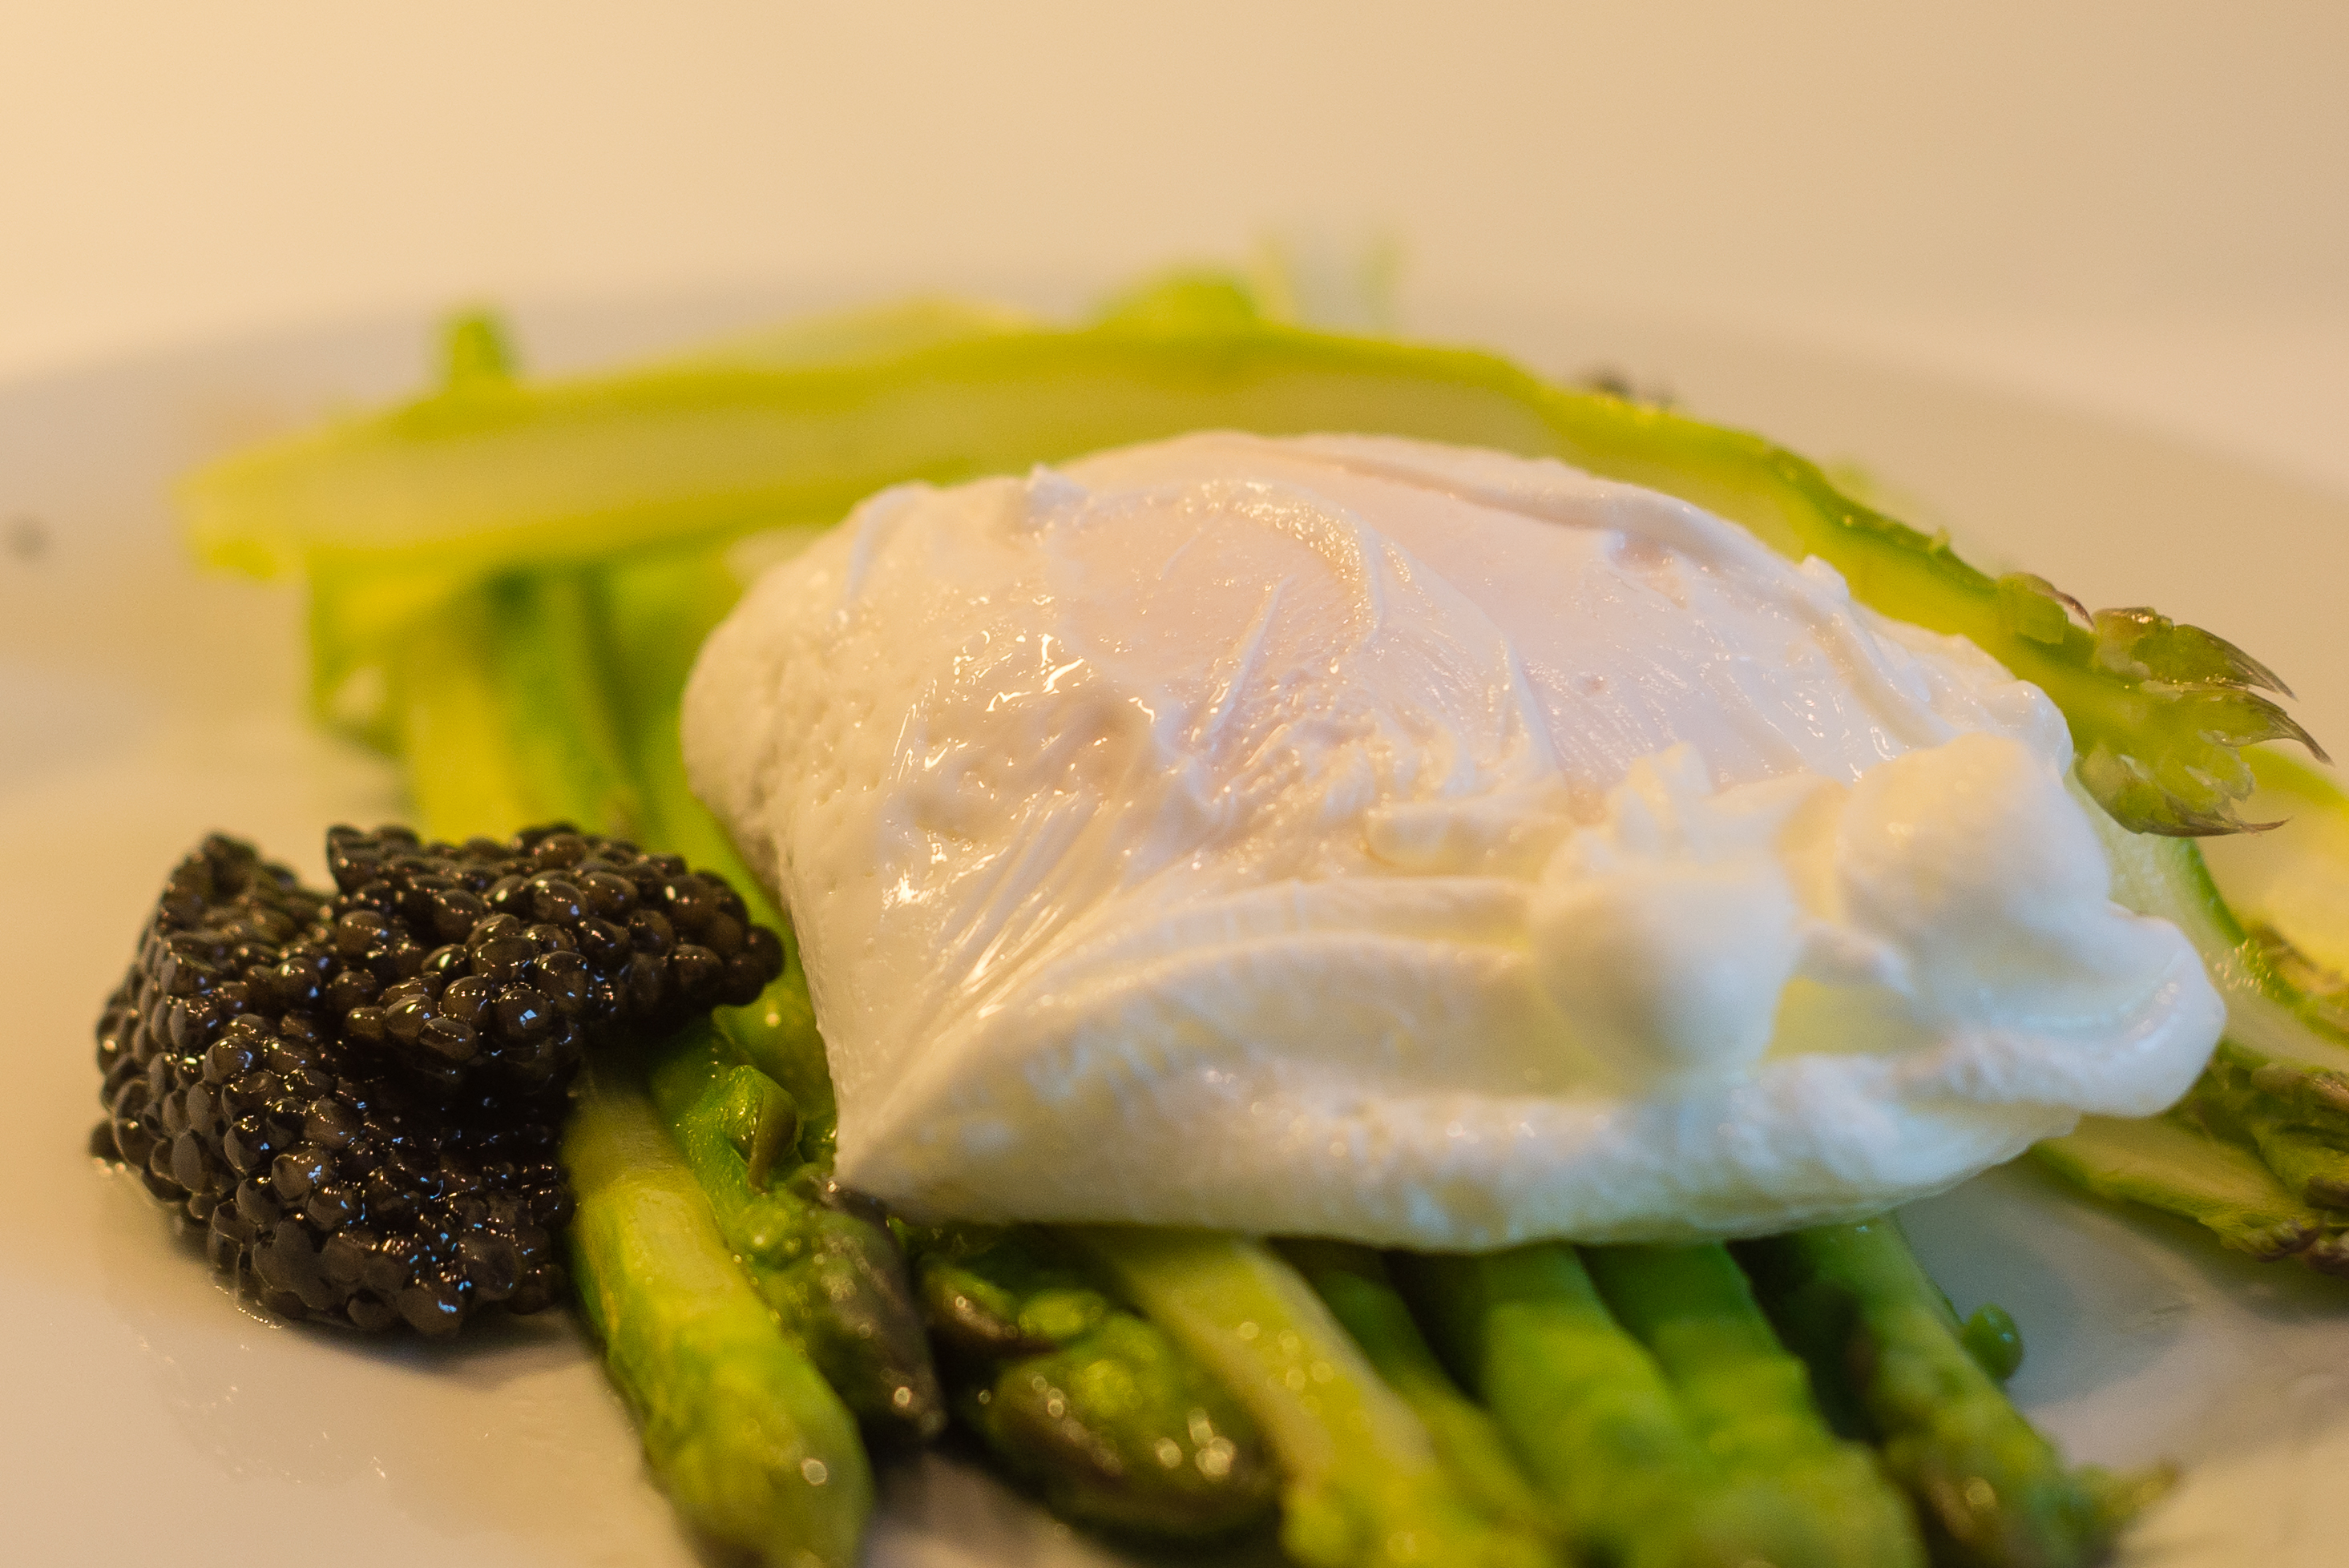 https://upload.wikimedia.org/wikipedia/commons/a/a6/Poached_egg_with_green_asparagus_and_Caviar_02.jpg